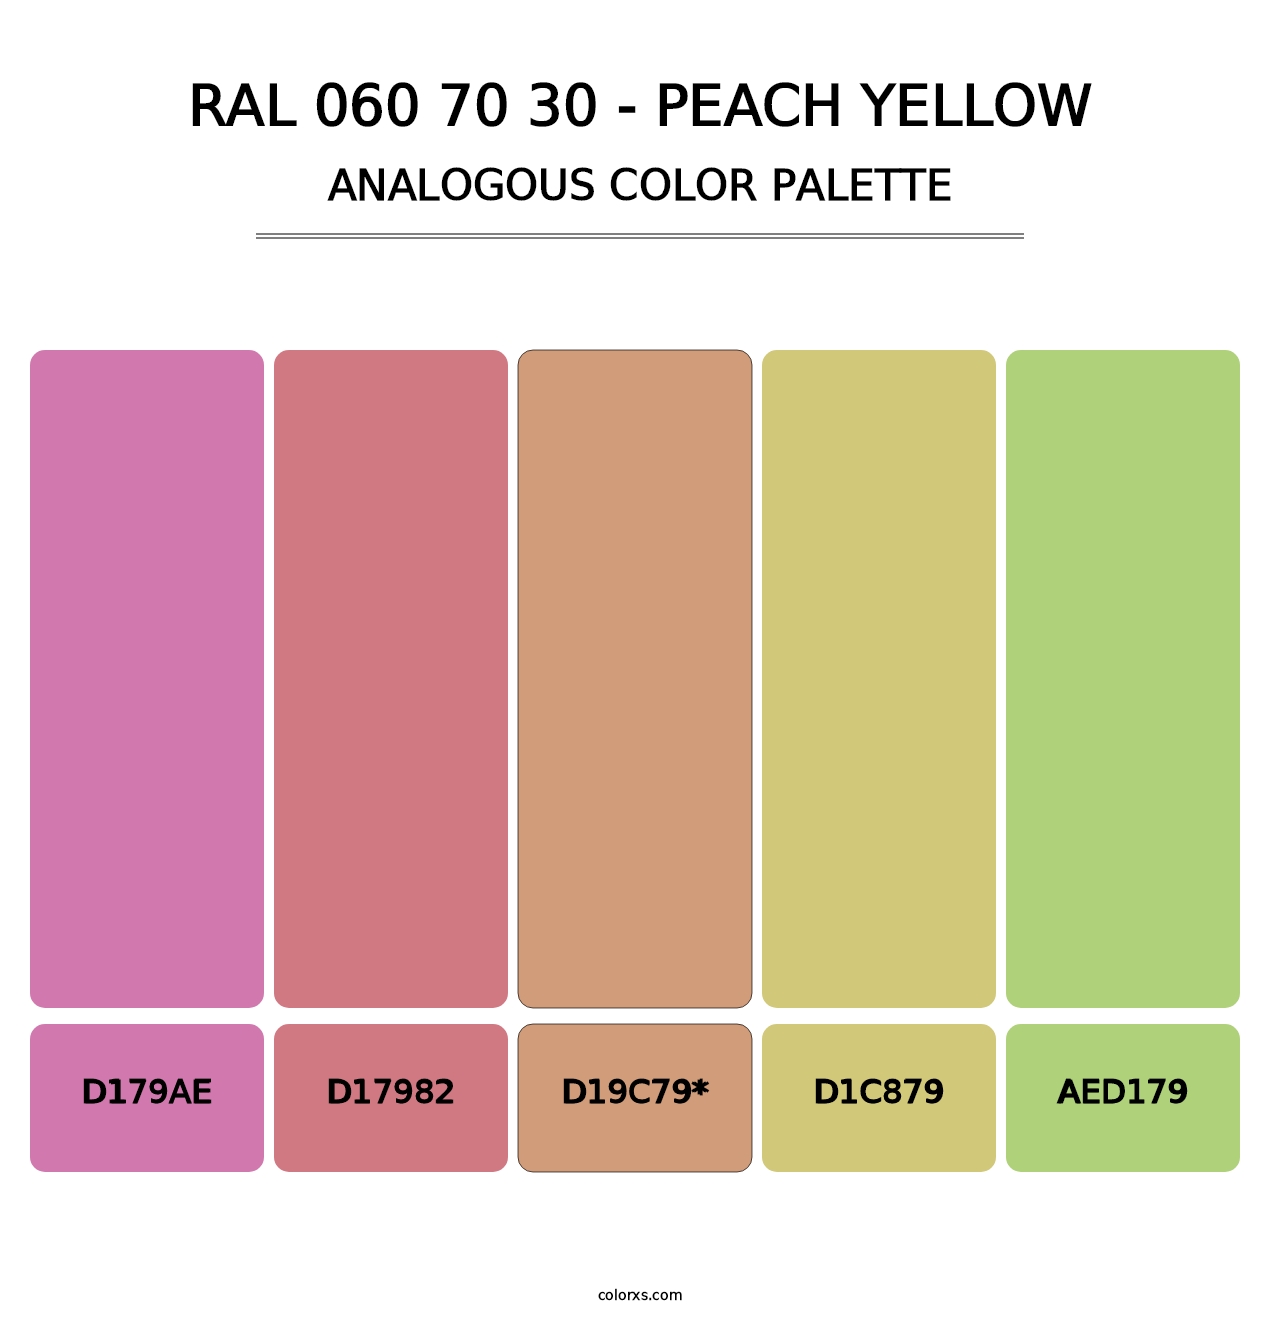 RAL 060 70 30 - Peach Yellow - Analogous Color Palette